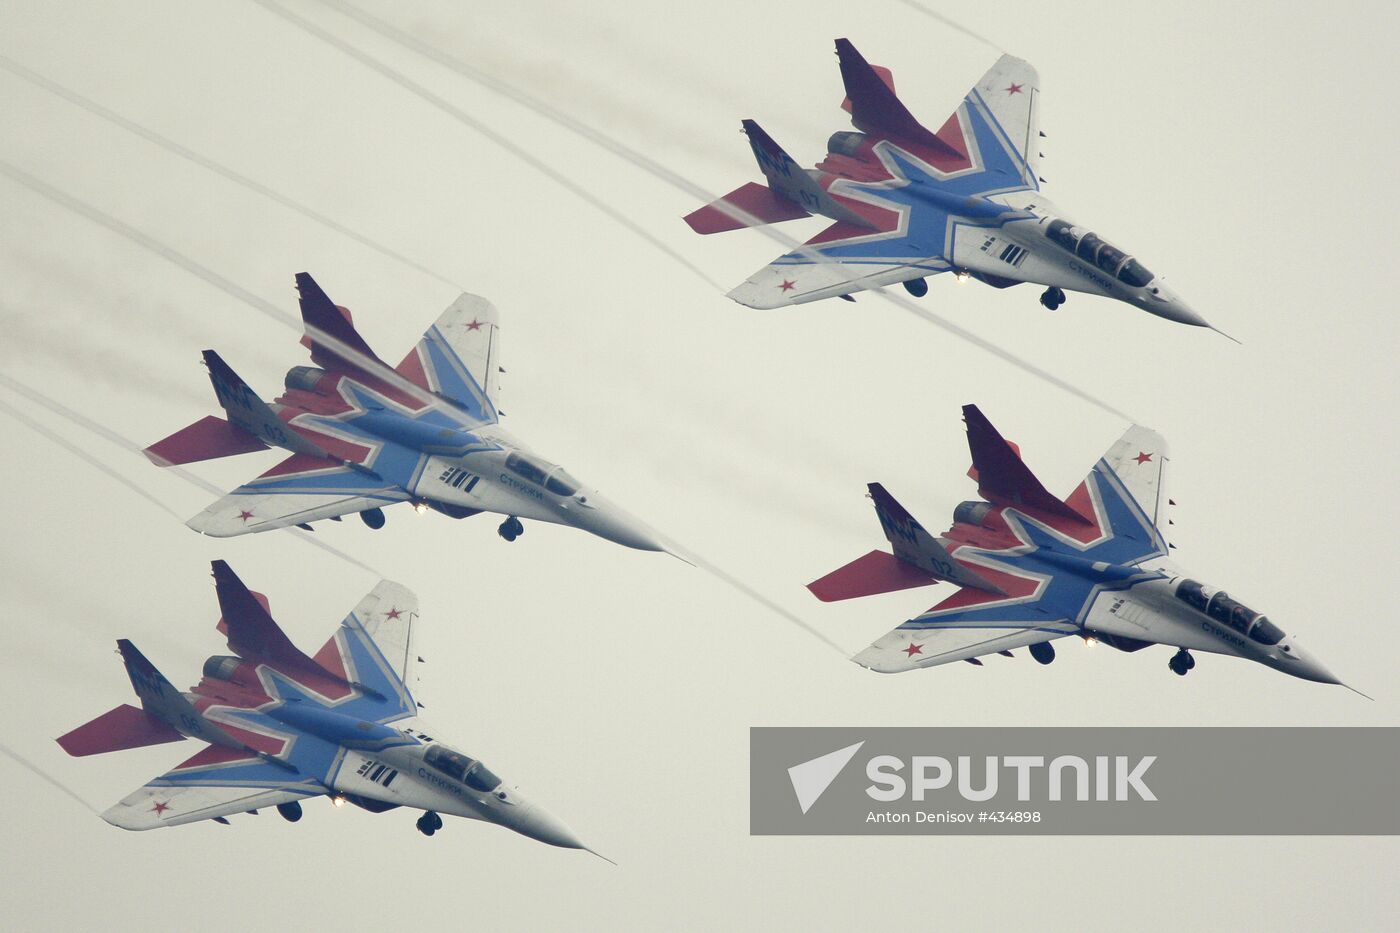 MiG-29 jet fighter aircraft of Strizhi aerobatic team